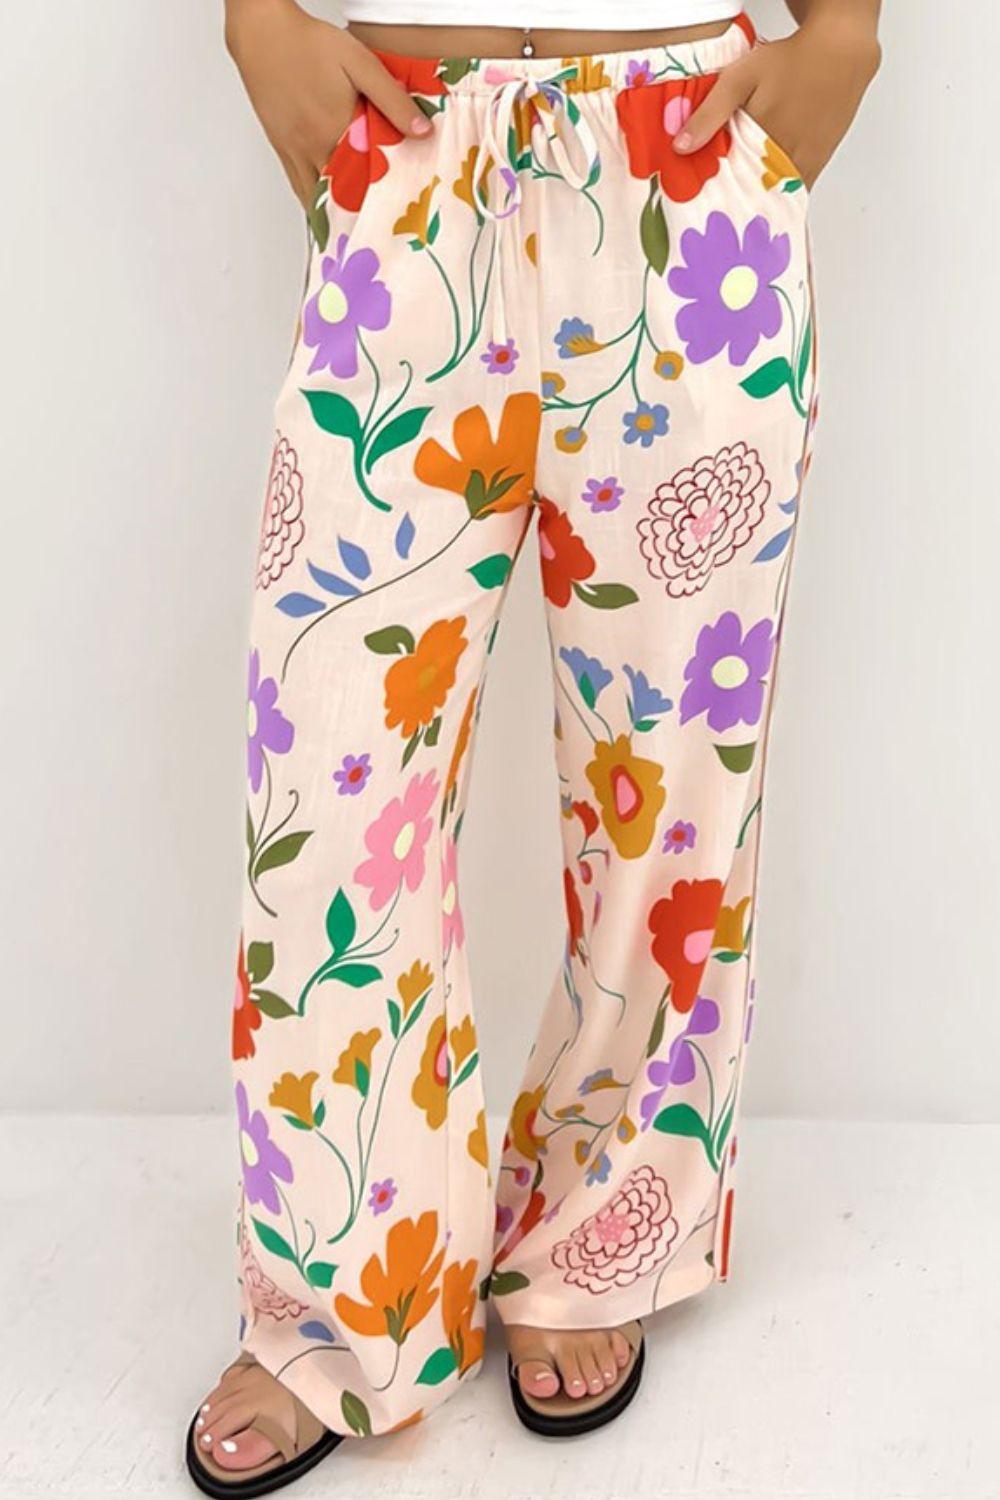 Drawstring Printed Pants with Pockets for Women